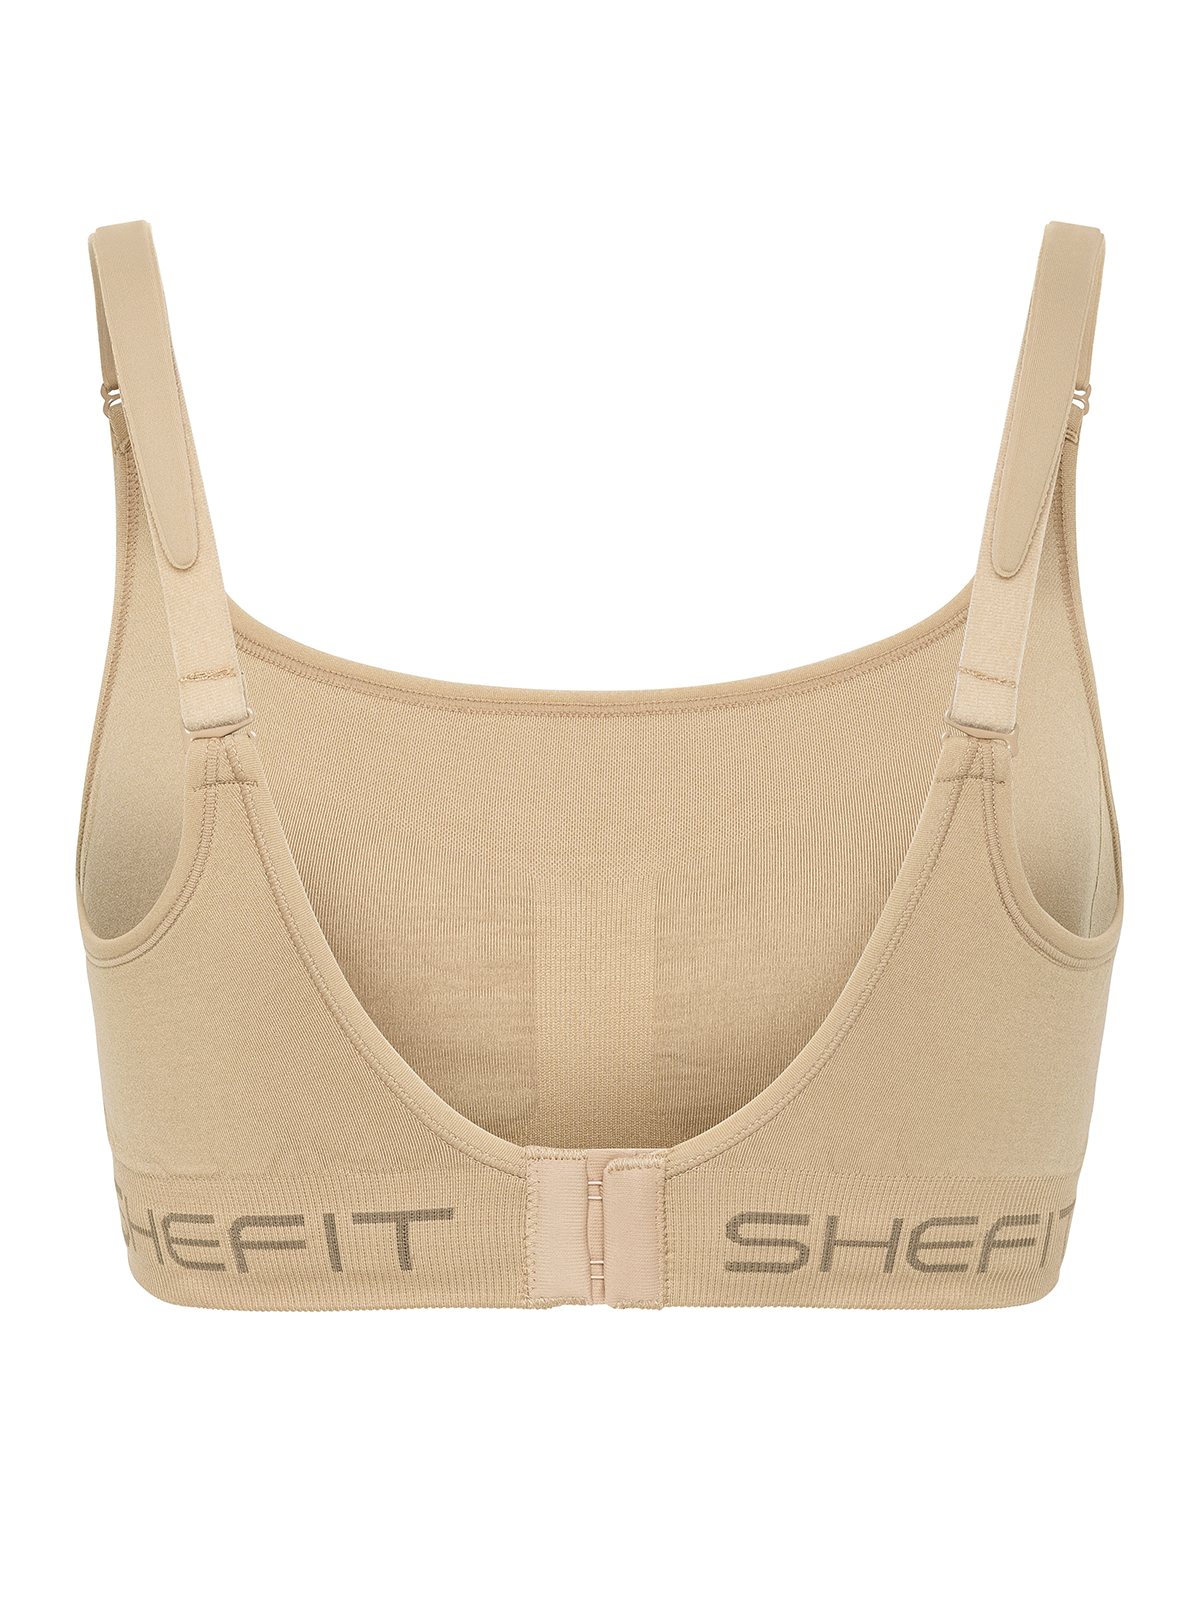 SHEFIT - Reader's Digest drops the news on the nine must-have bras